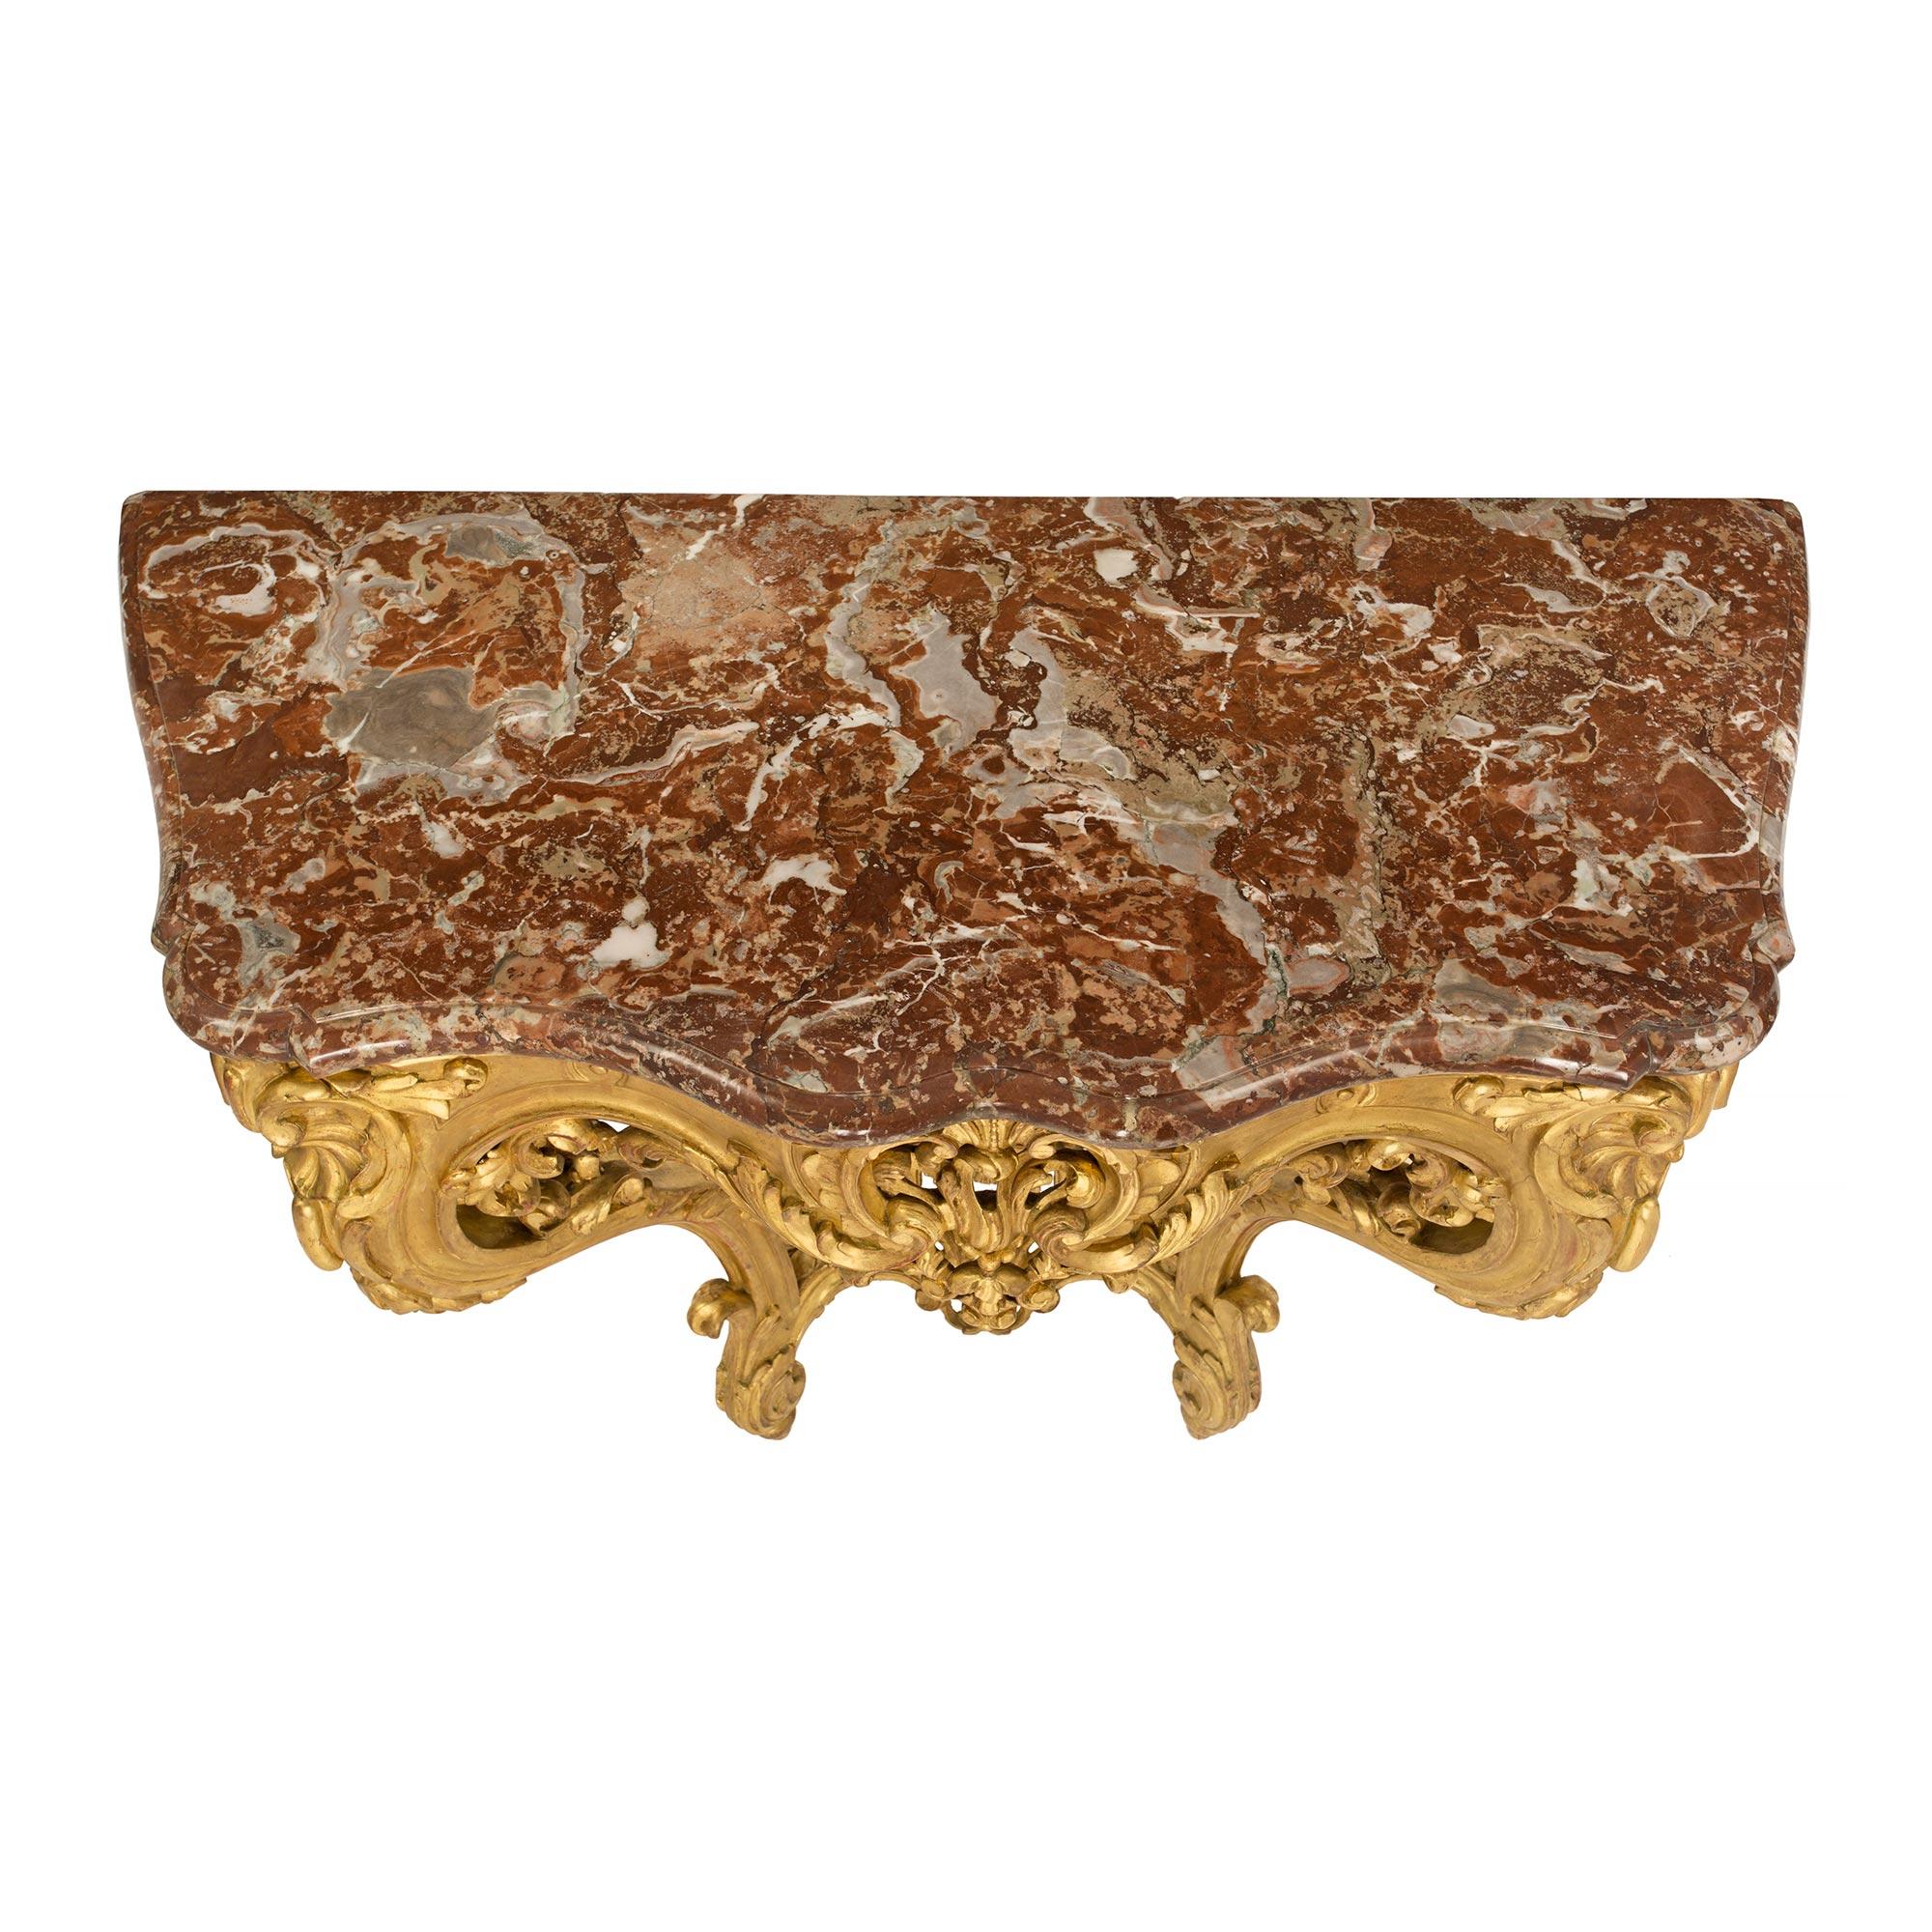 An elegant French 19th Century Louis XV st. giltwood and marble wall mounted console. The console is raised by fine topie shaped feet below elegant cabriole legs adorned with richly carved acanthus leaves and floral movements. The legs are connected